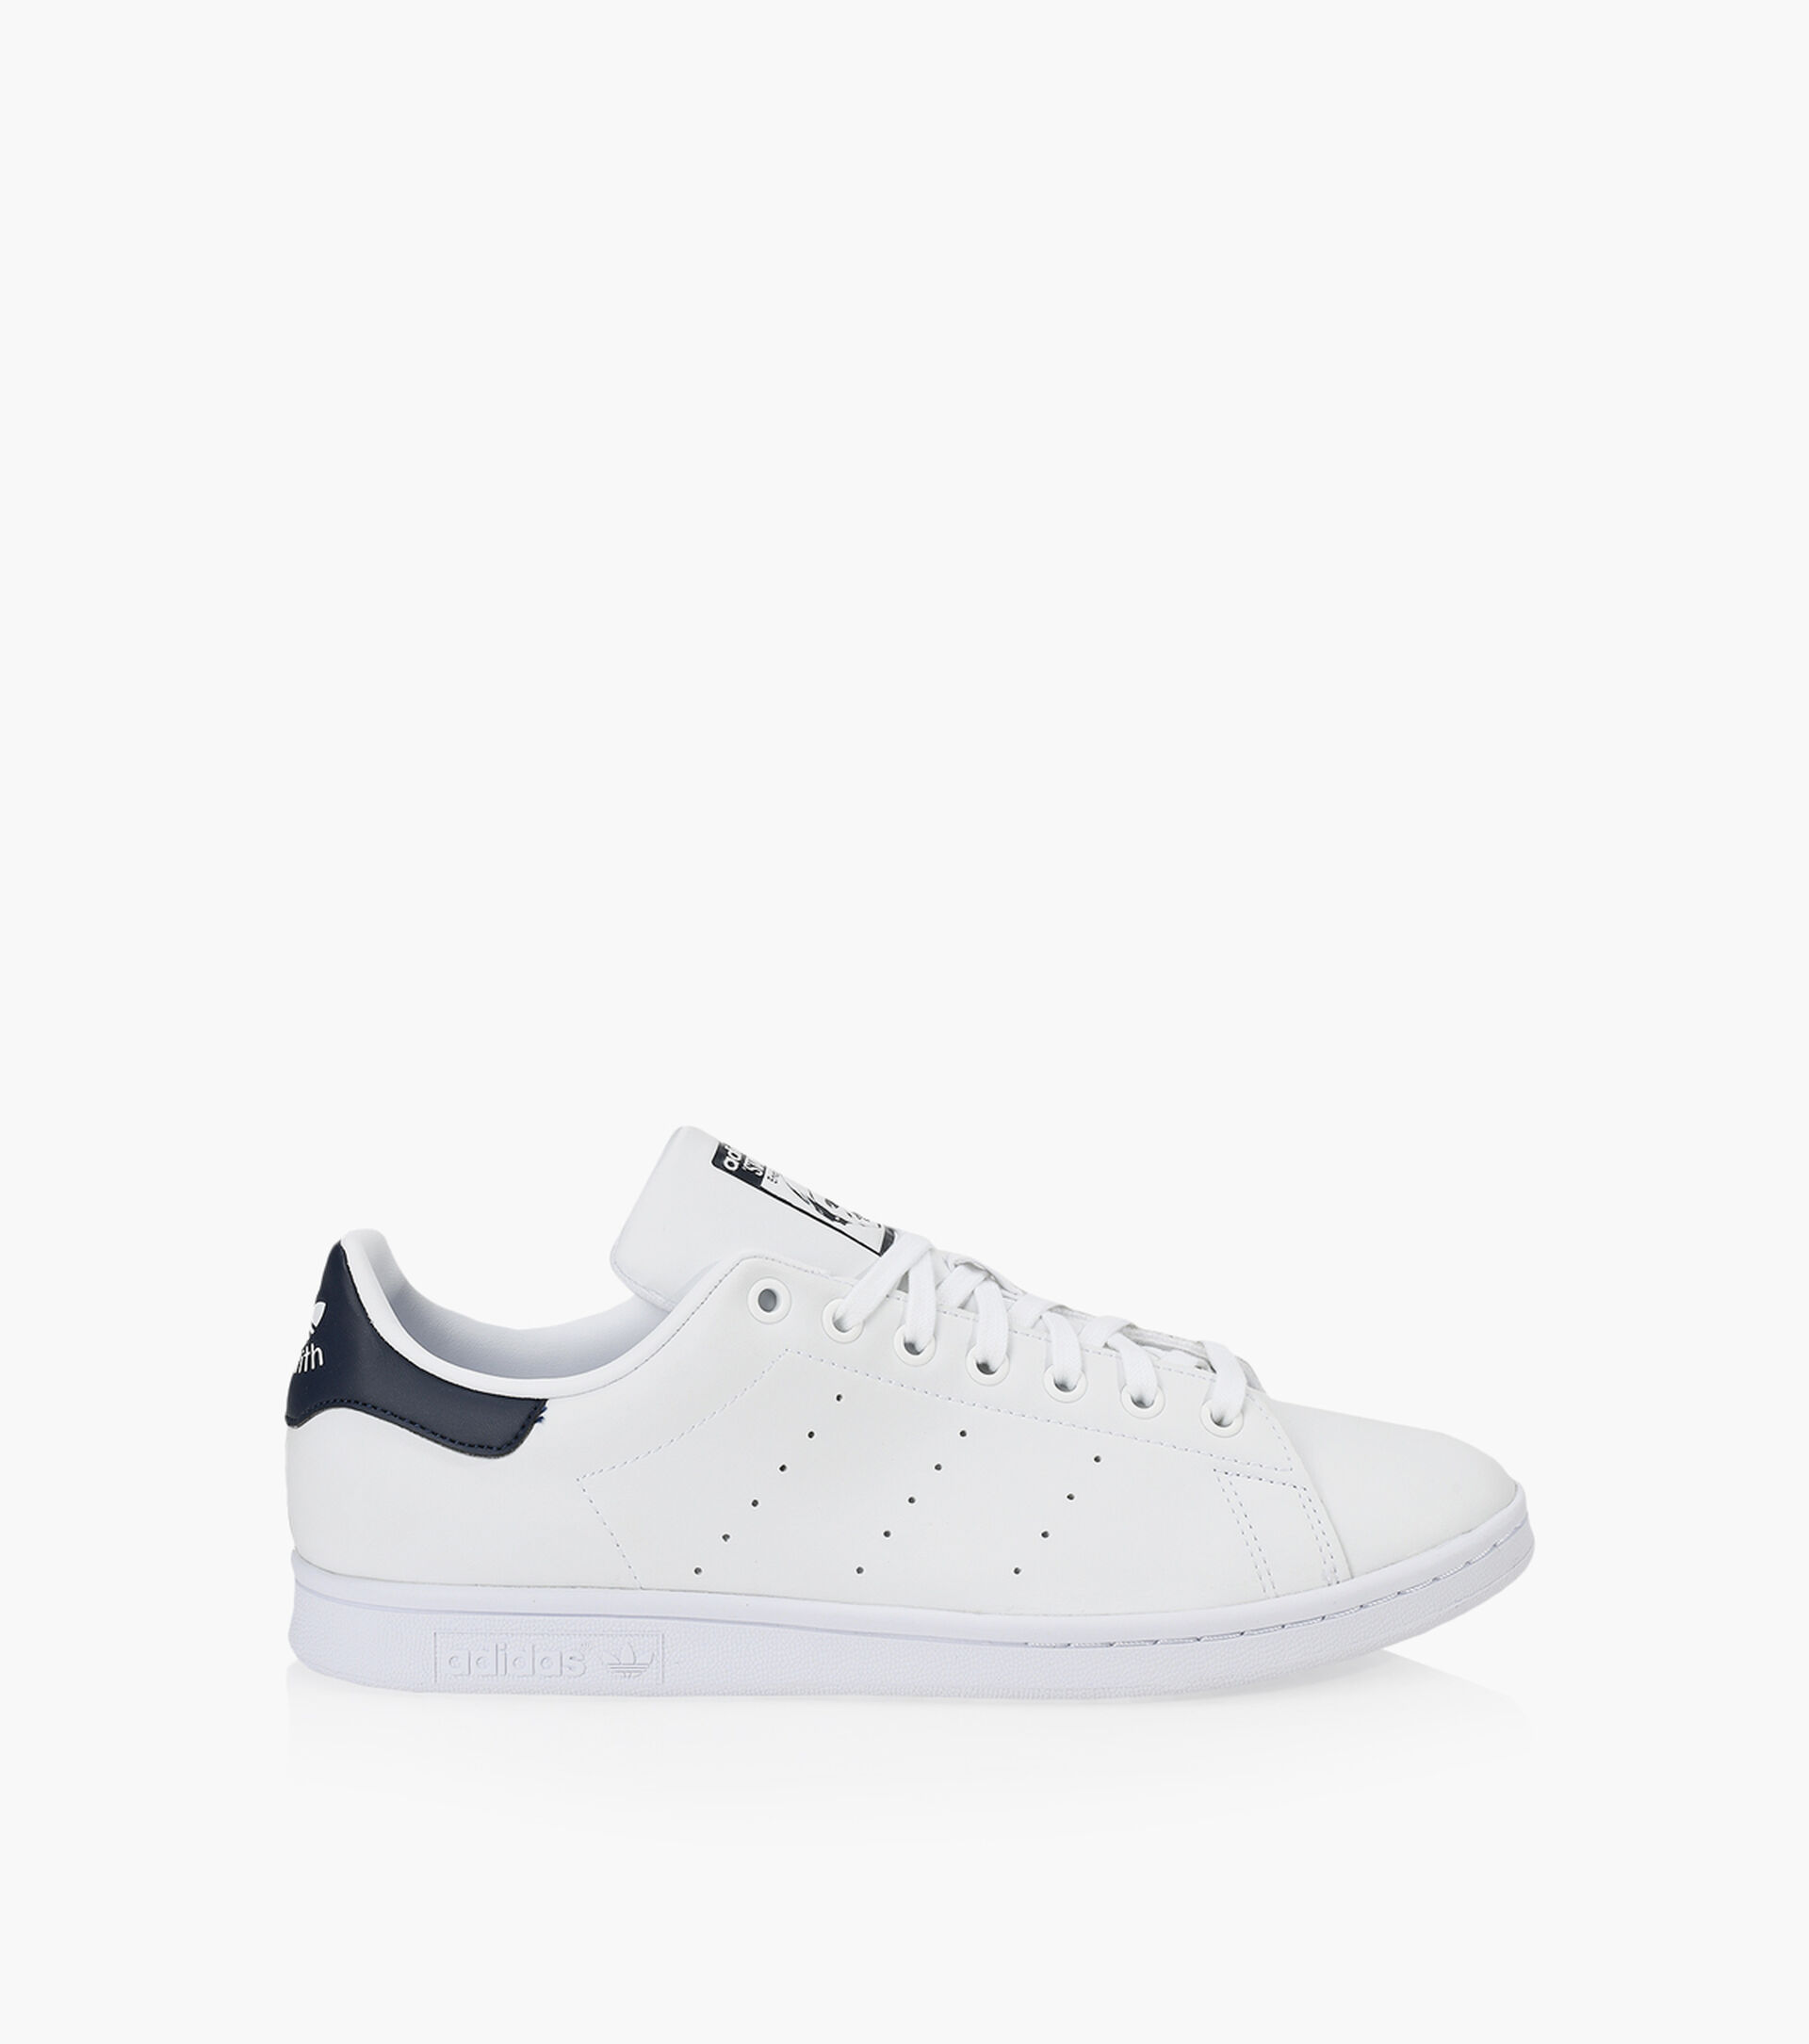 ADIDAS STAN SMITH - White Leather | Browns Shoes